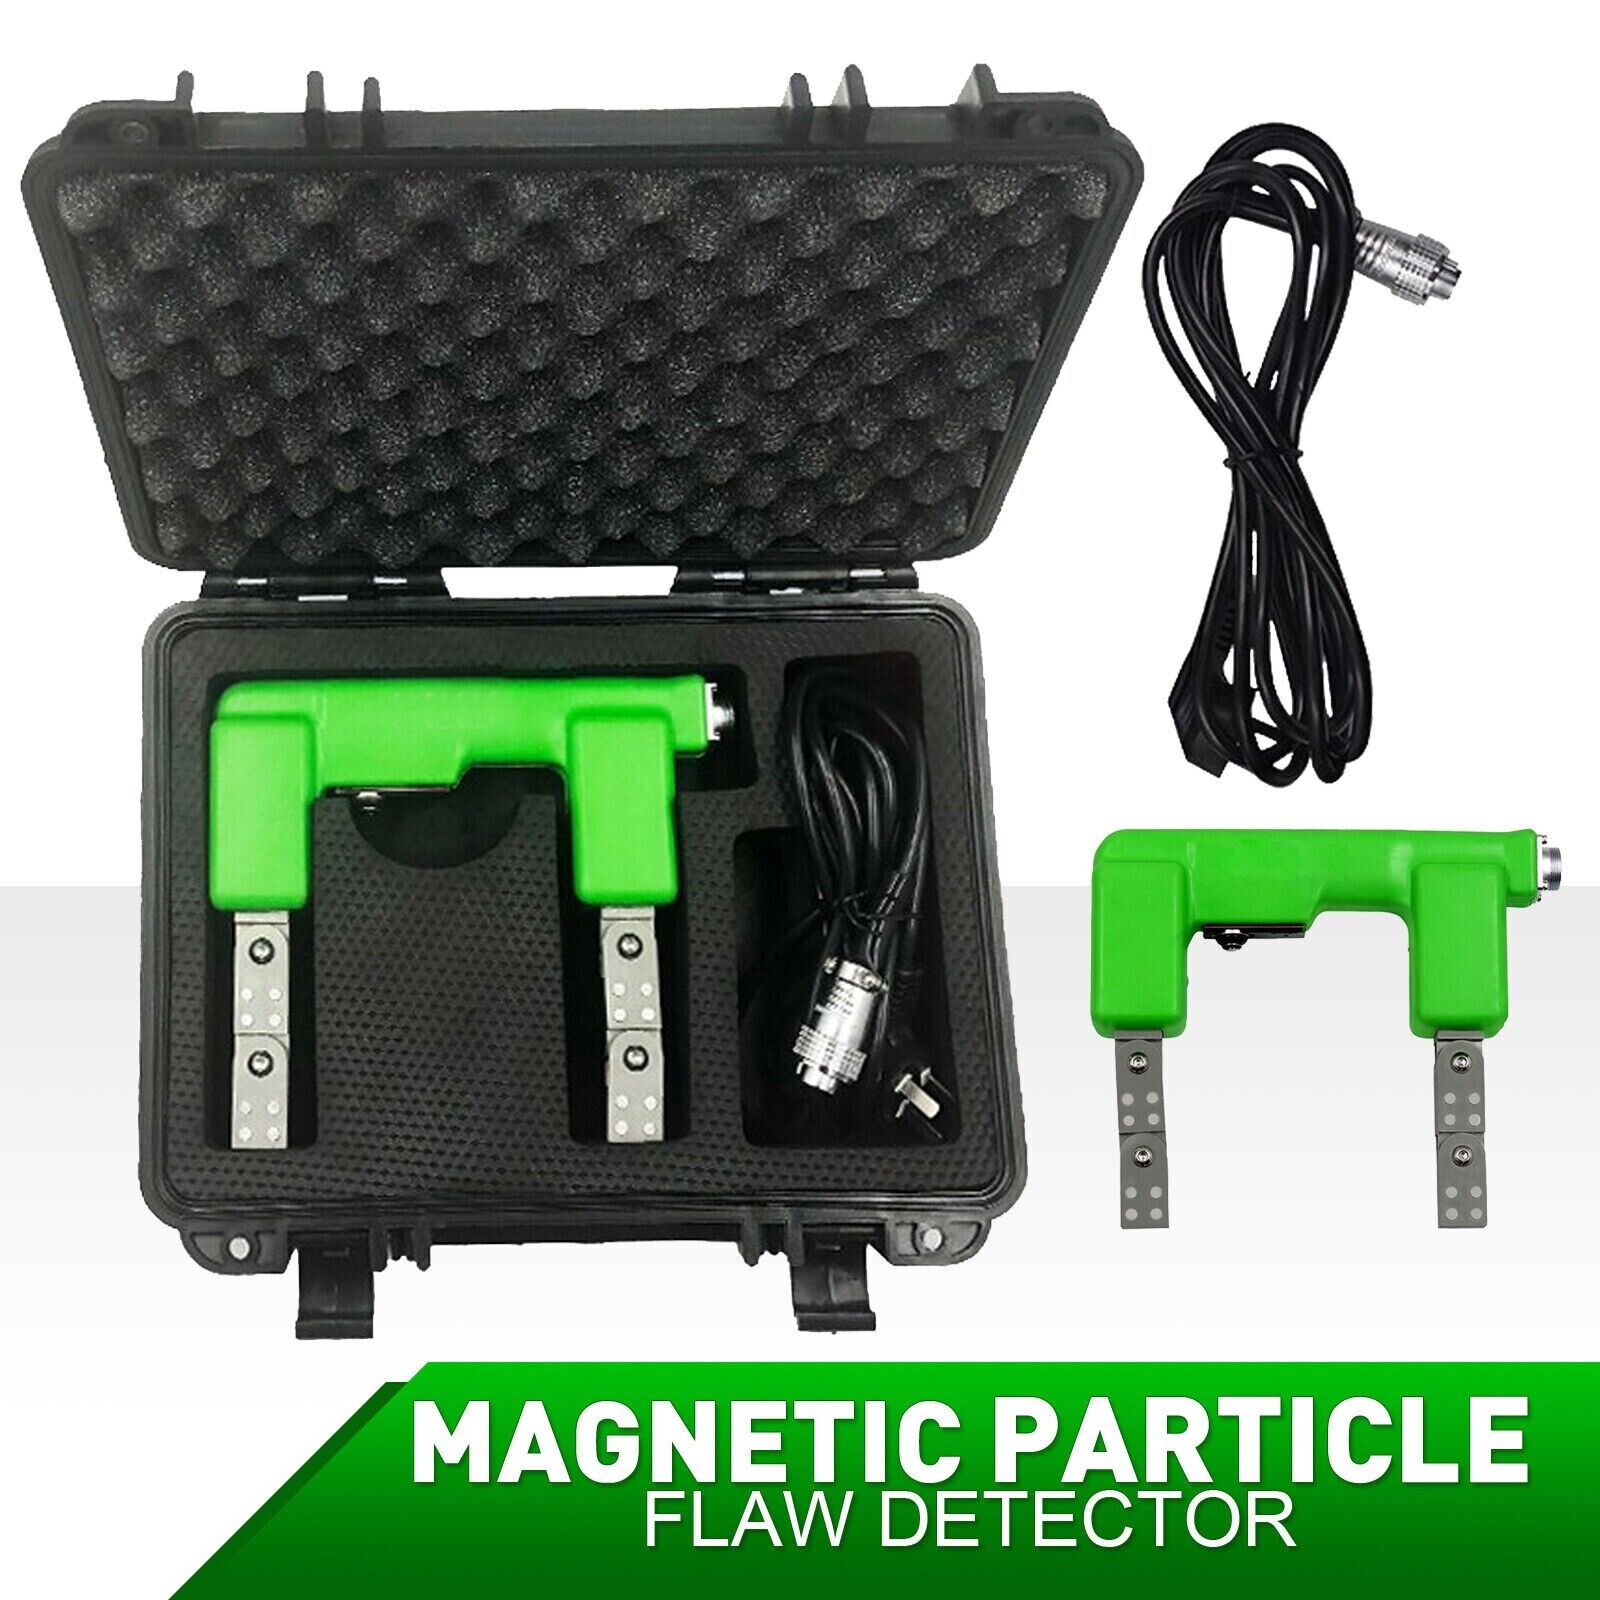 Magnetic Particle Flaw Detector Magna Flux AC Electromagnetic Yoke Tester Tool